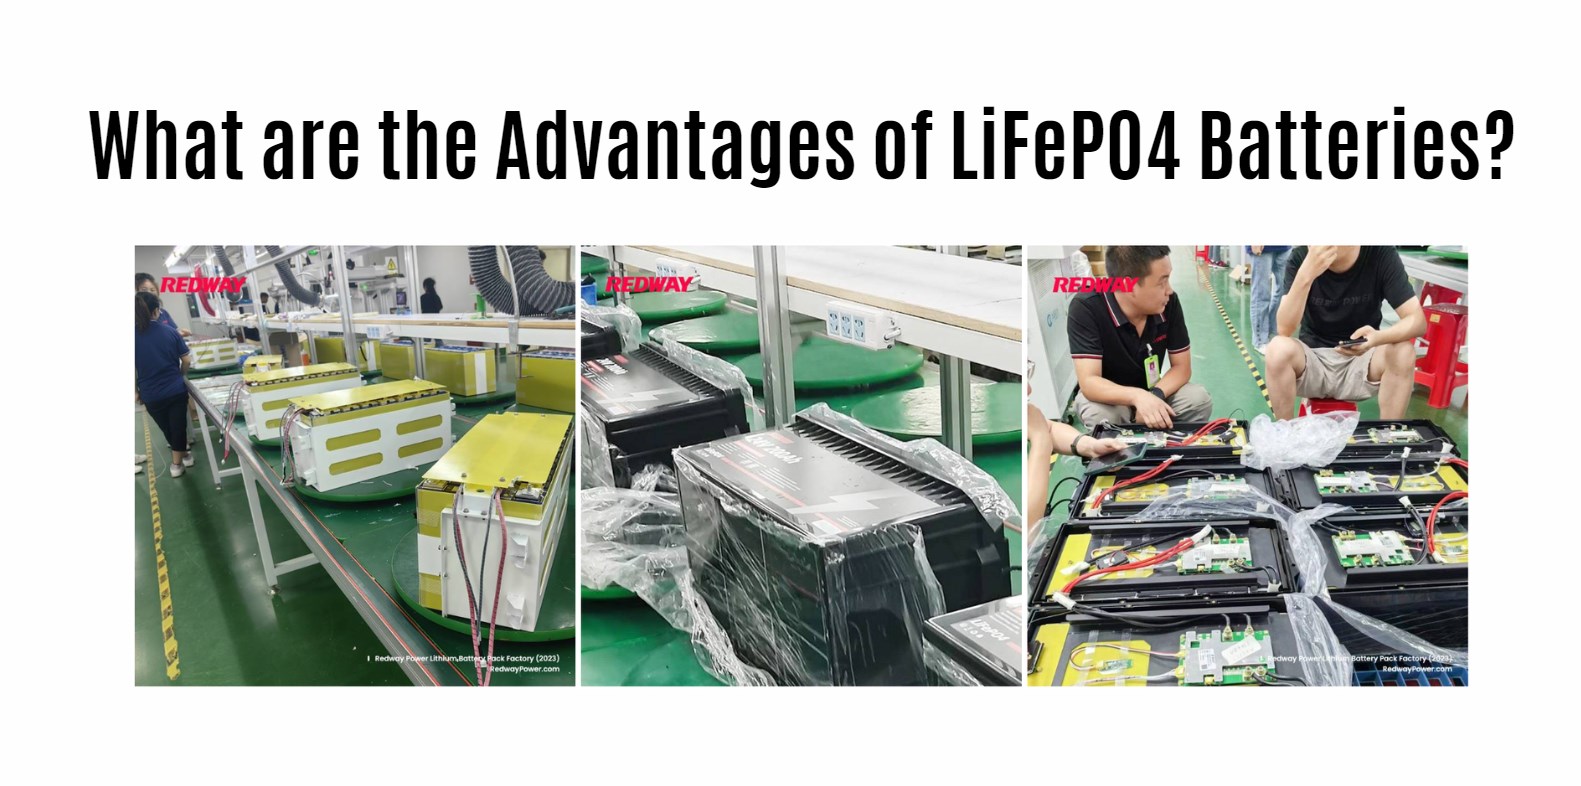 What are the Advantages of LiFePO4 Batteries? 24v 200ah lifepo4 battery factory oem redway power